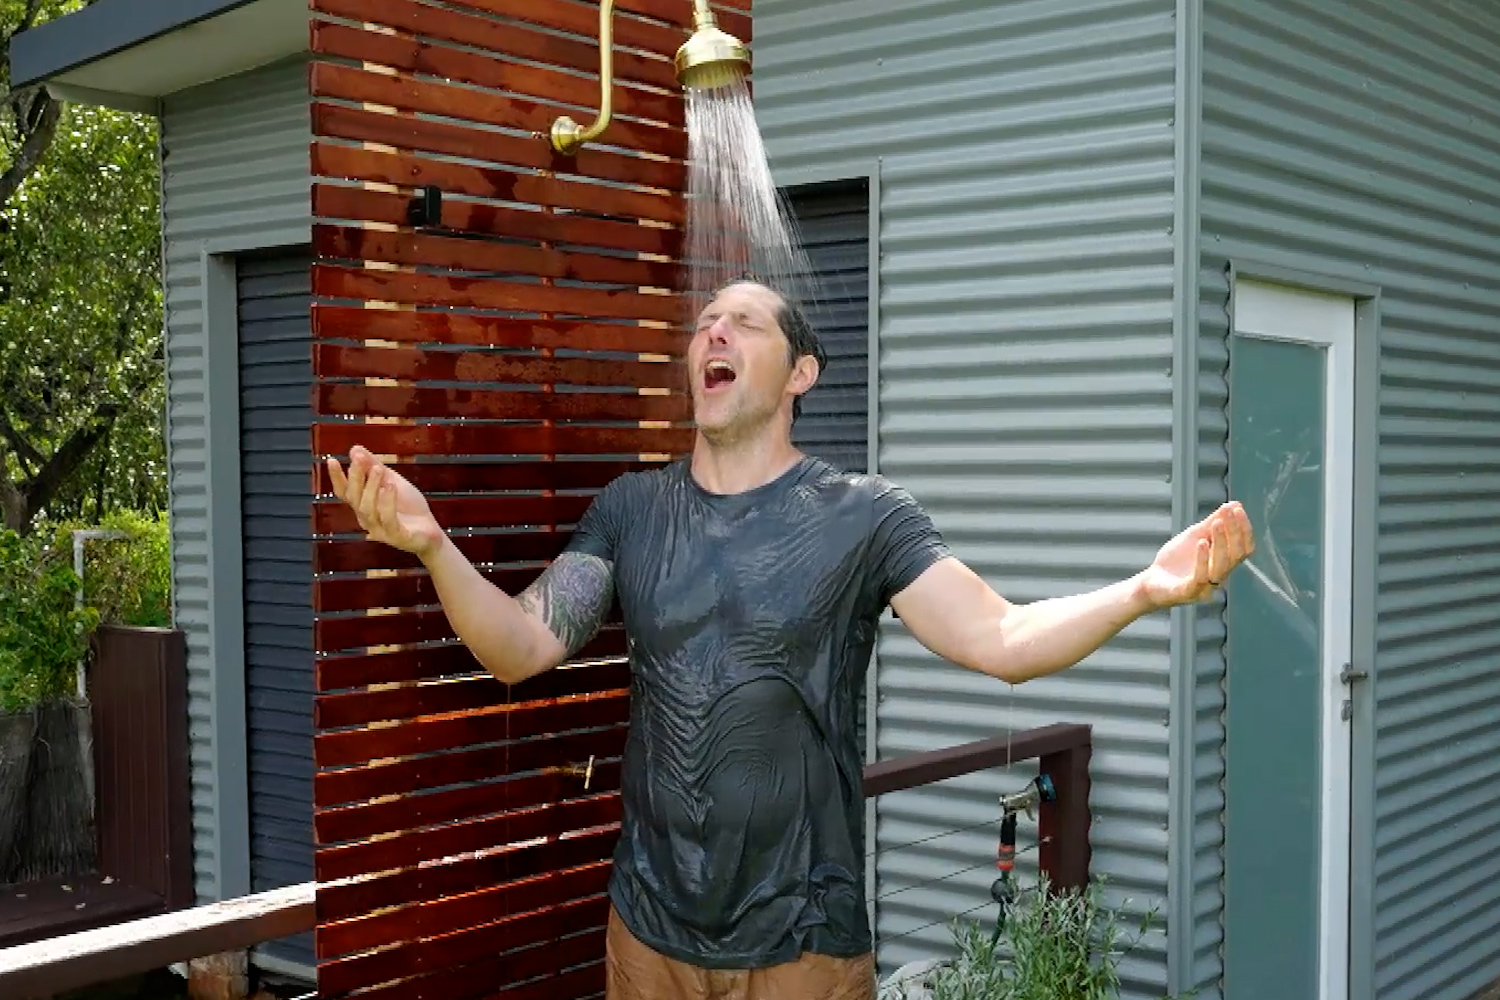 How to build an easy outdoor shower